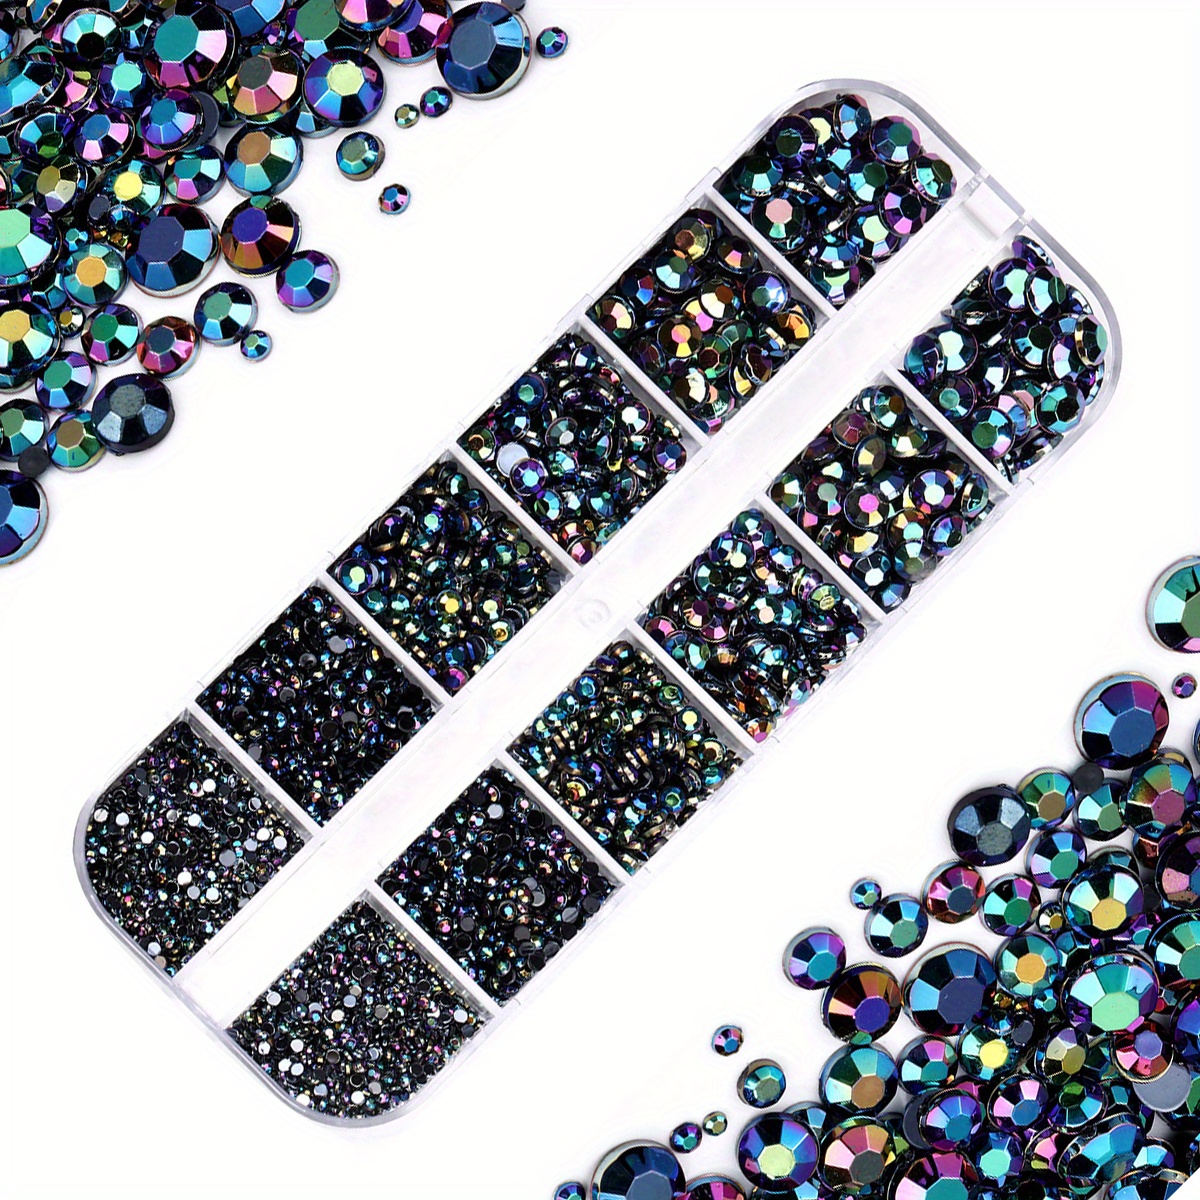 

12 Grids Crystal Rhinestones For Nails Flat Back Acrylic Nail Art Stones For 3d Nail Art Crafts, Nail Art, Clothes, Shoes, Bags & Diy Projects